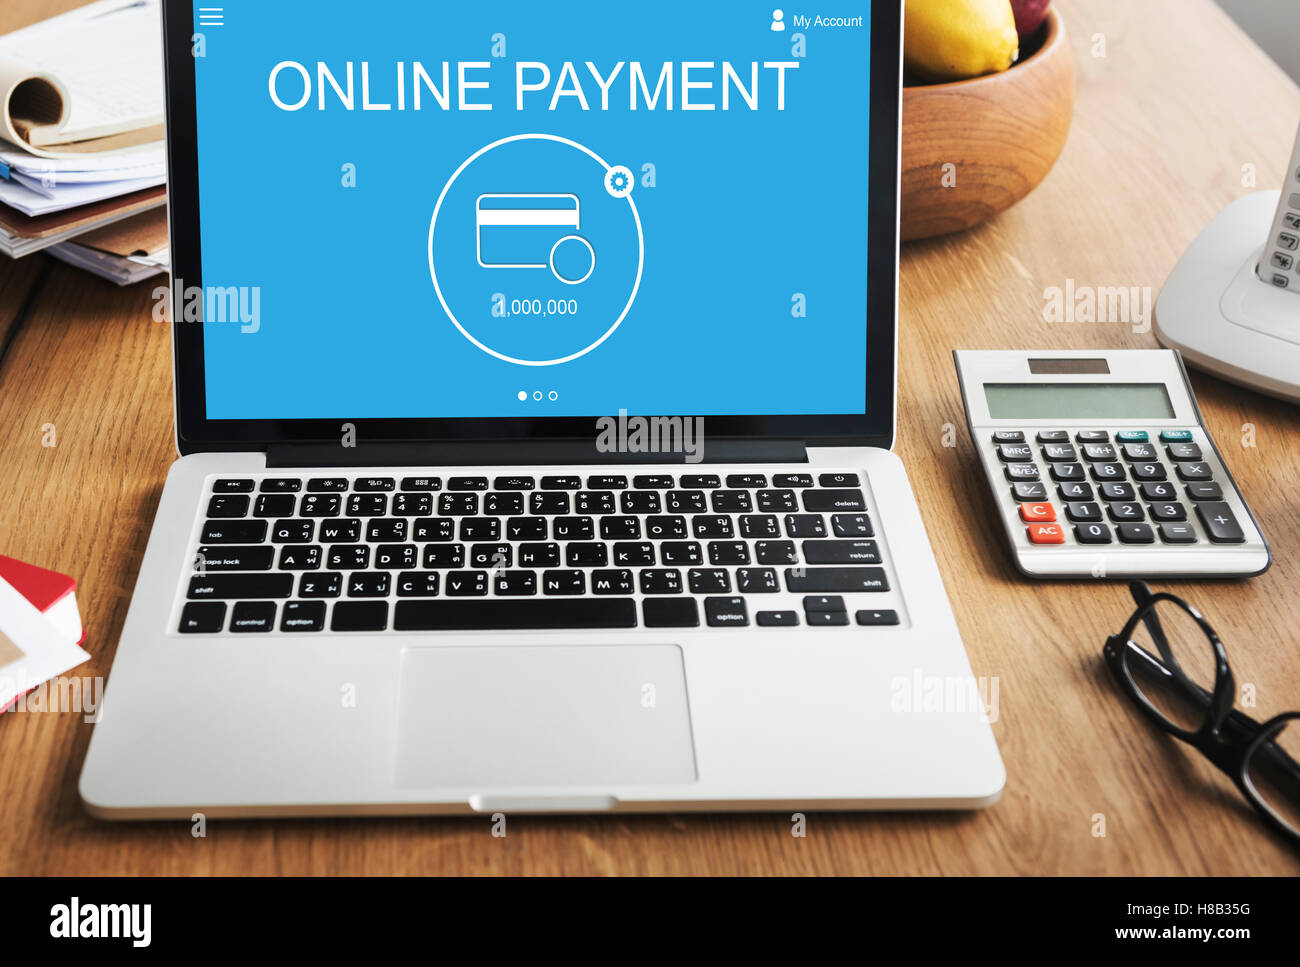 Online Payment Internet Banking Technology Concept Stock Photo